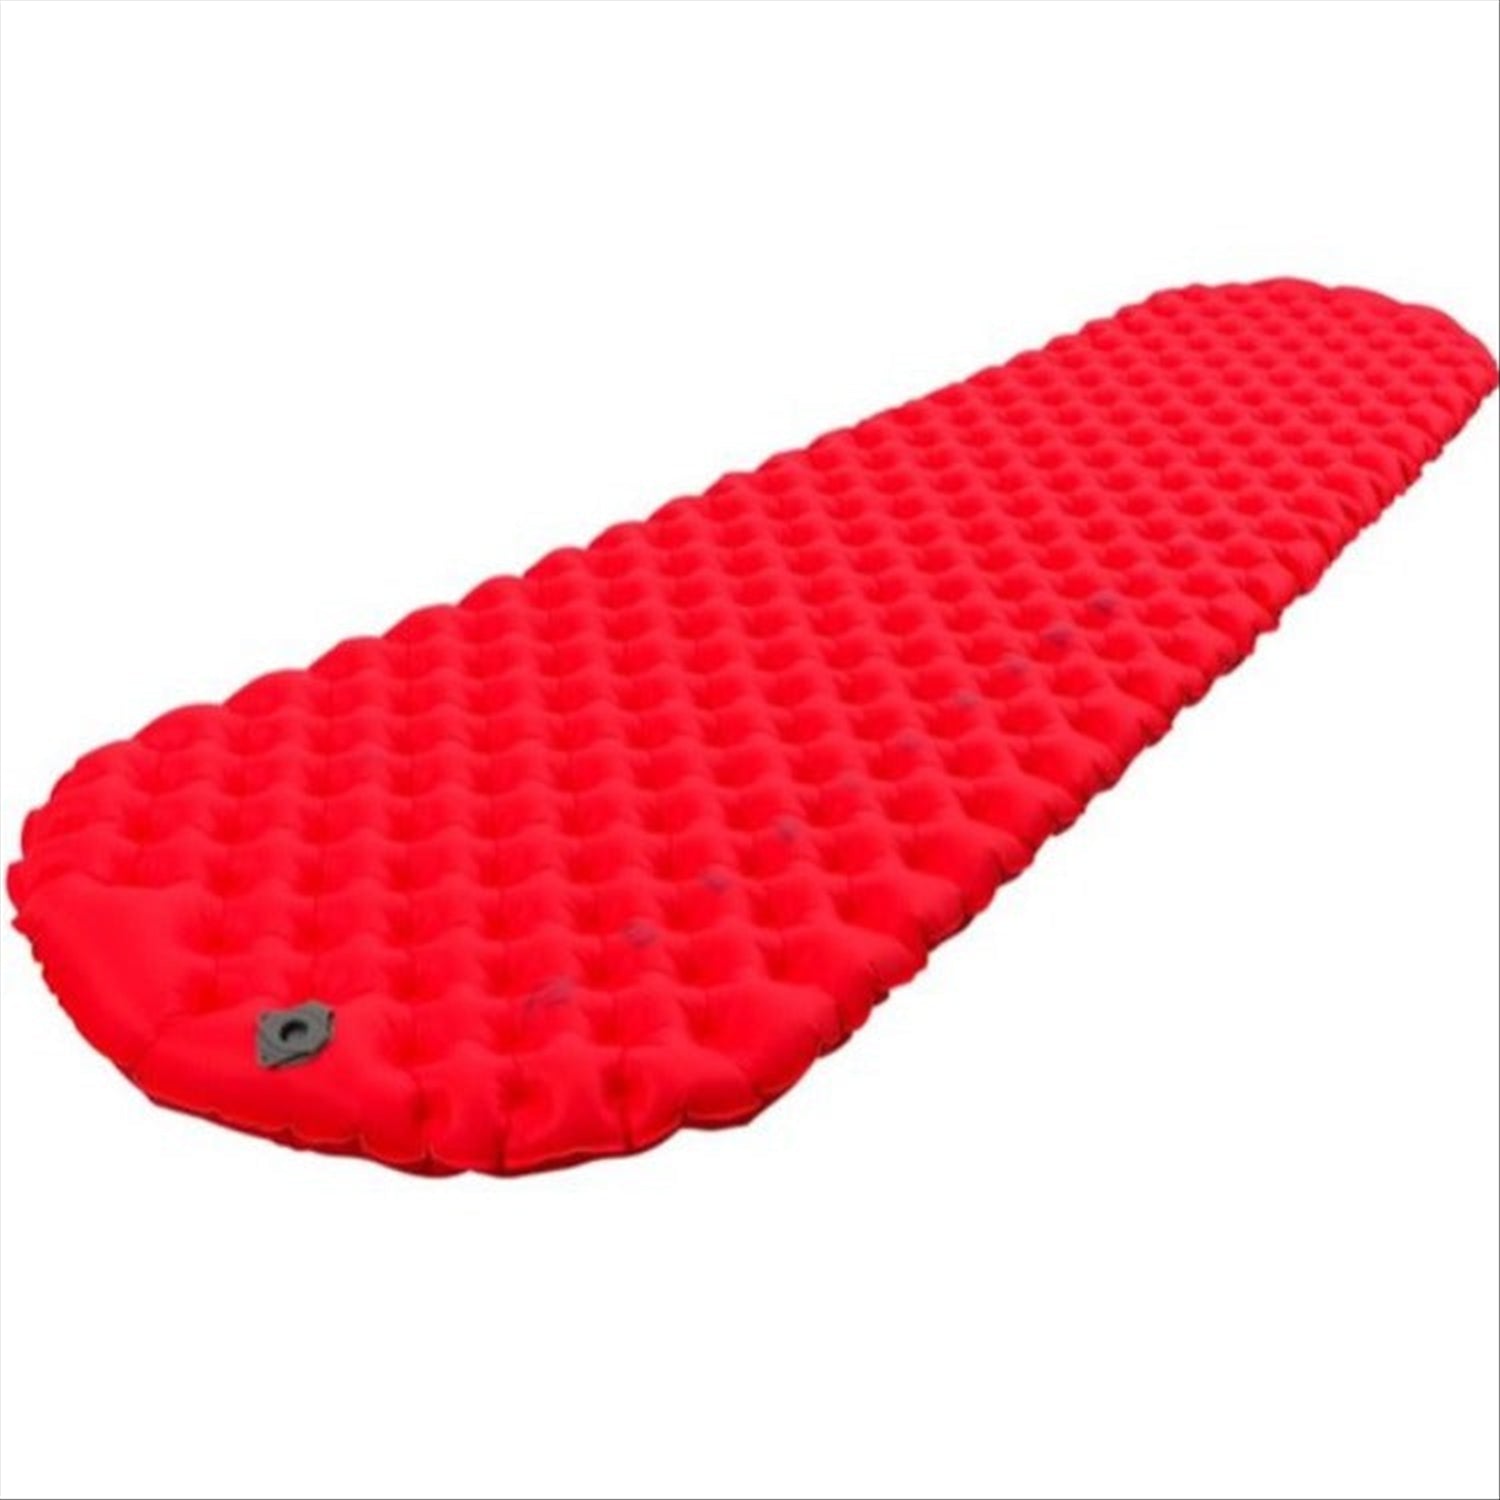 Sea to Summit Sea To Summit Comfort Plus Insulated Mat, R-Value 4